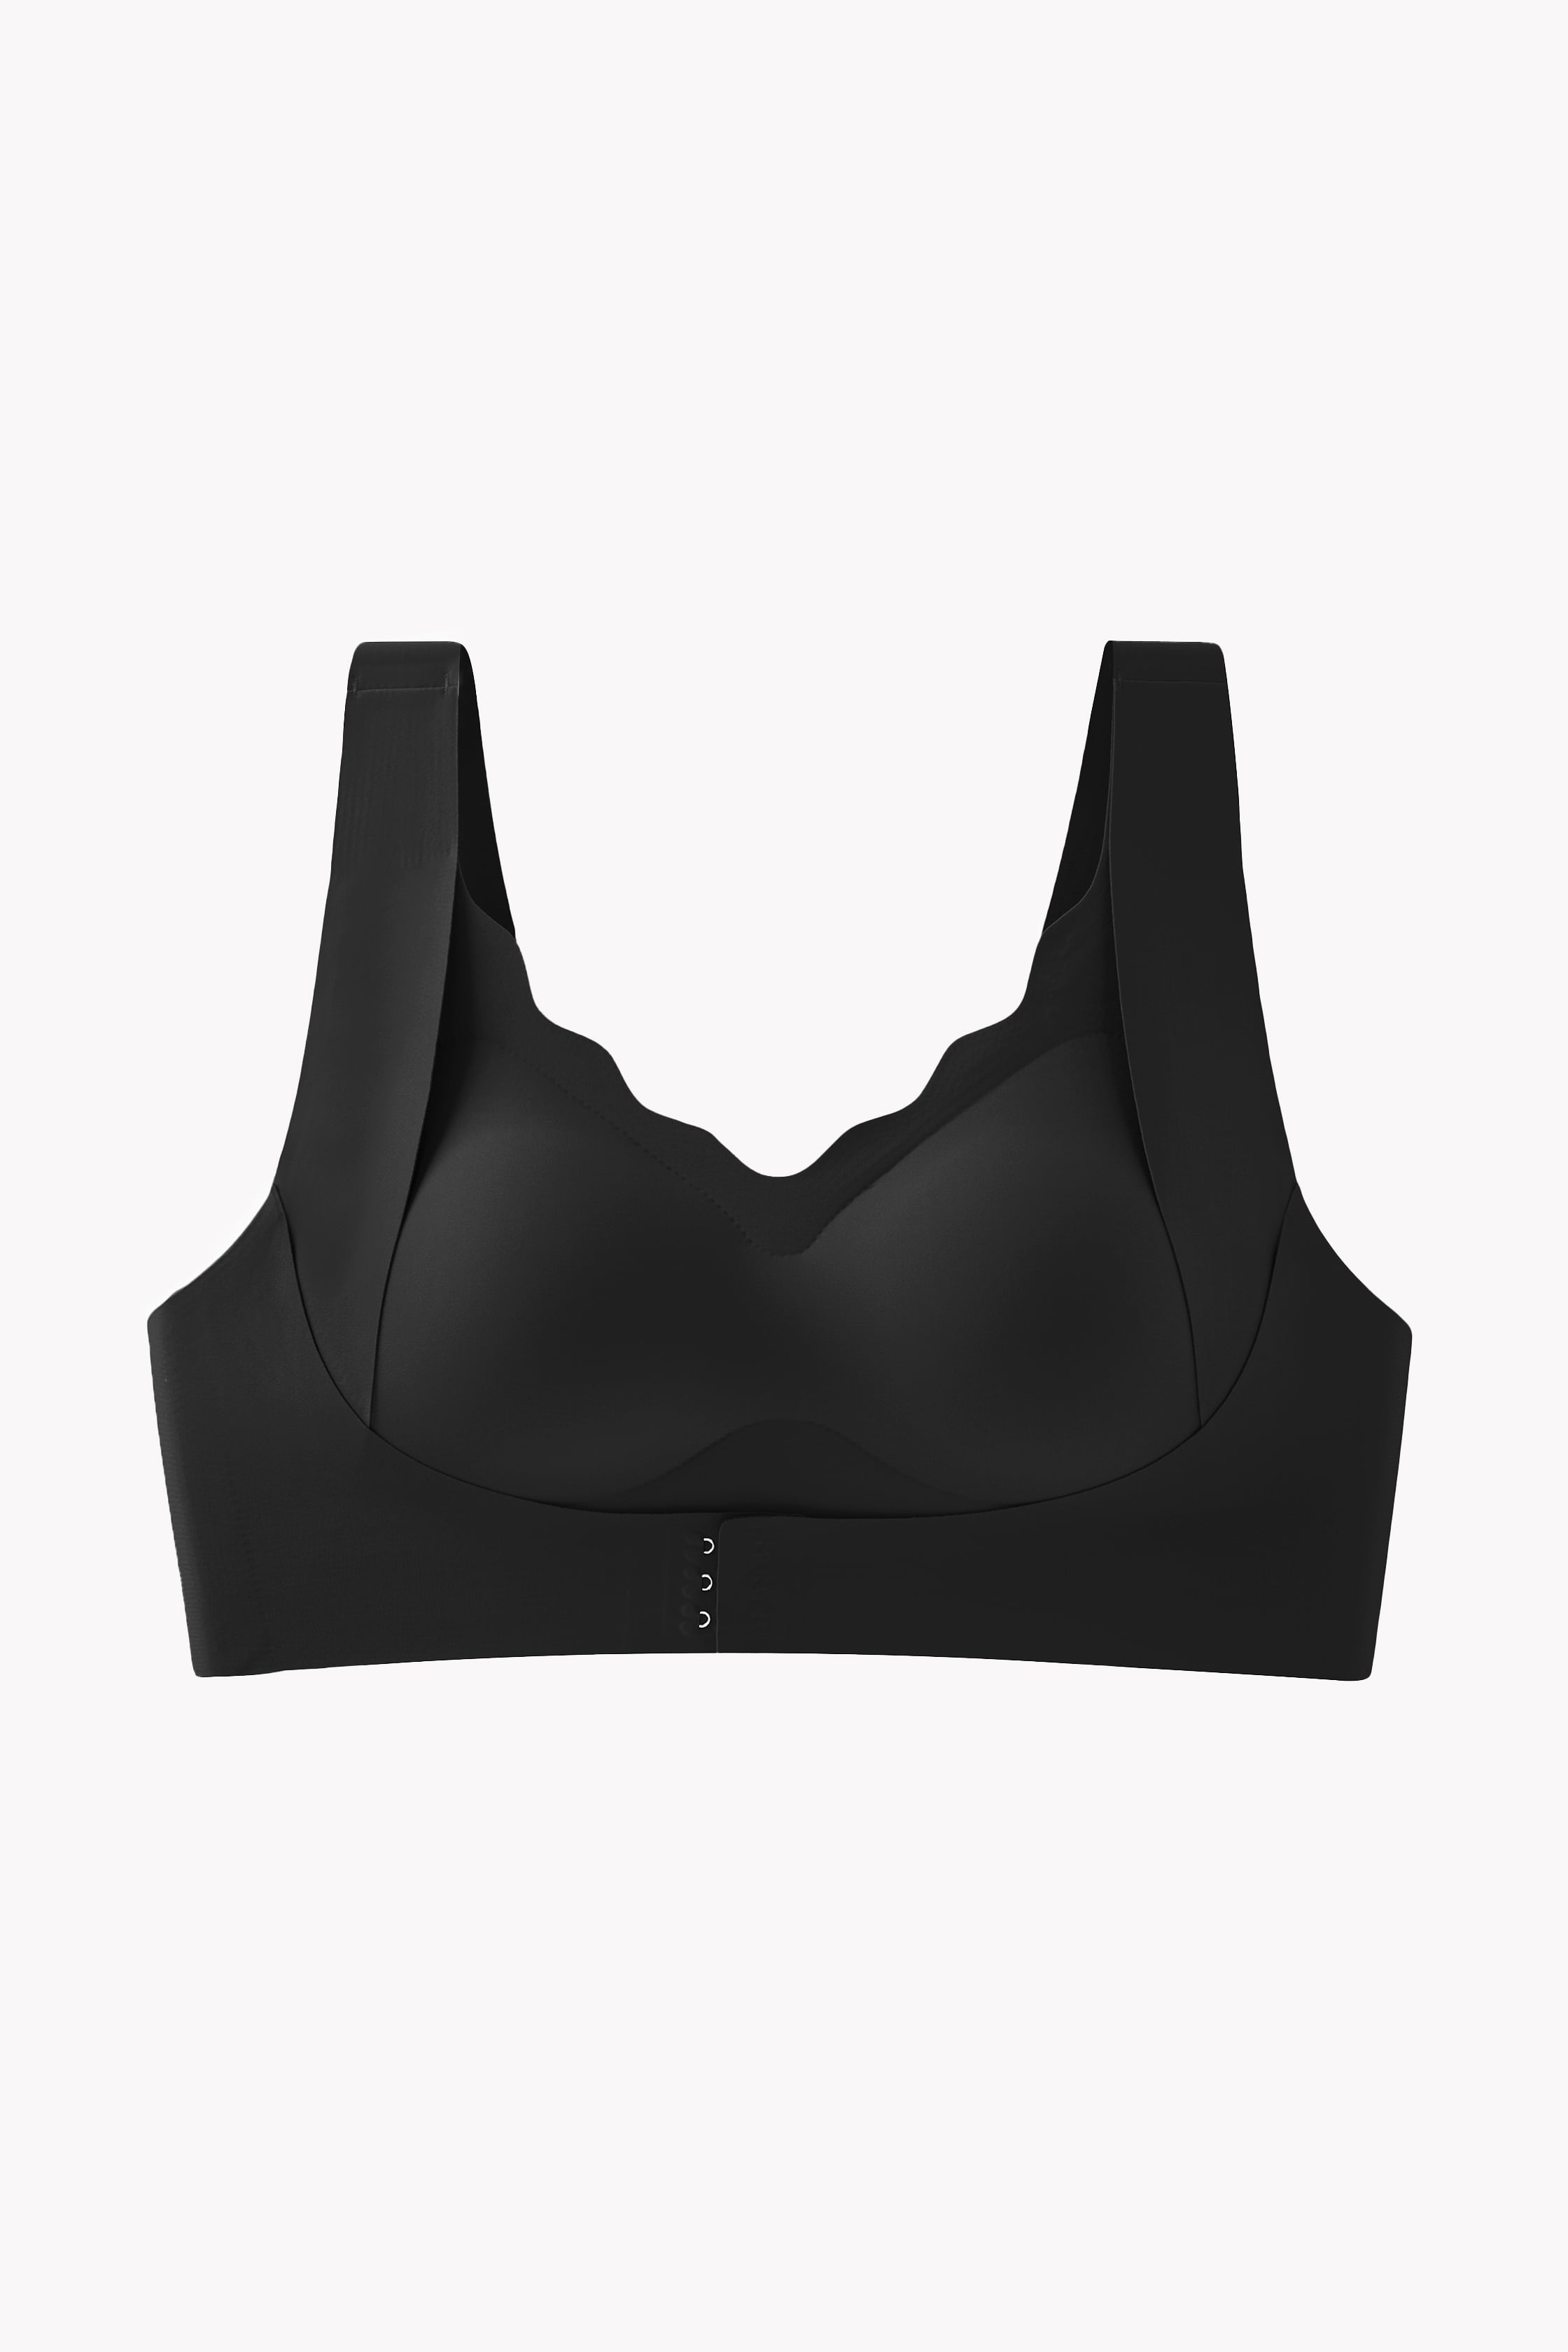 Easy Pieces™️ Front Closure Push-Up Wire Free Bra